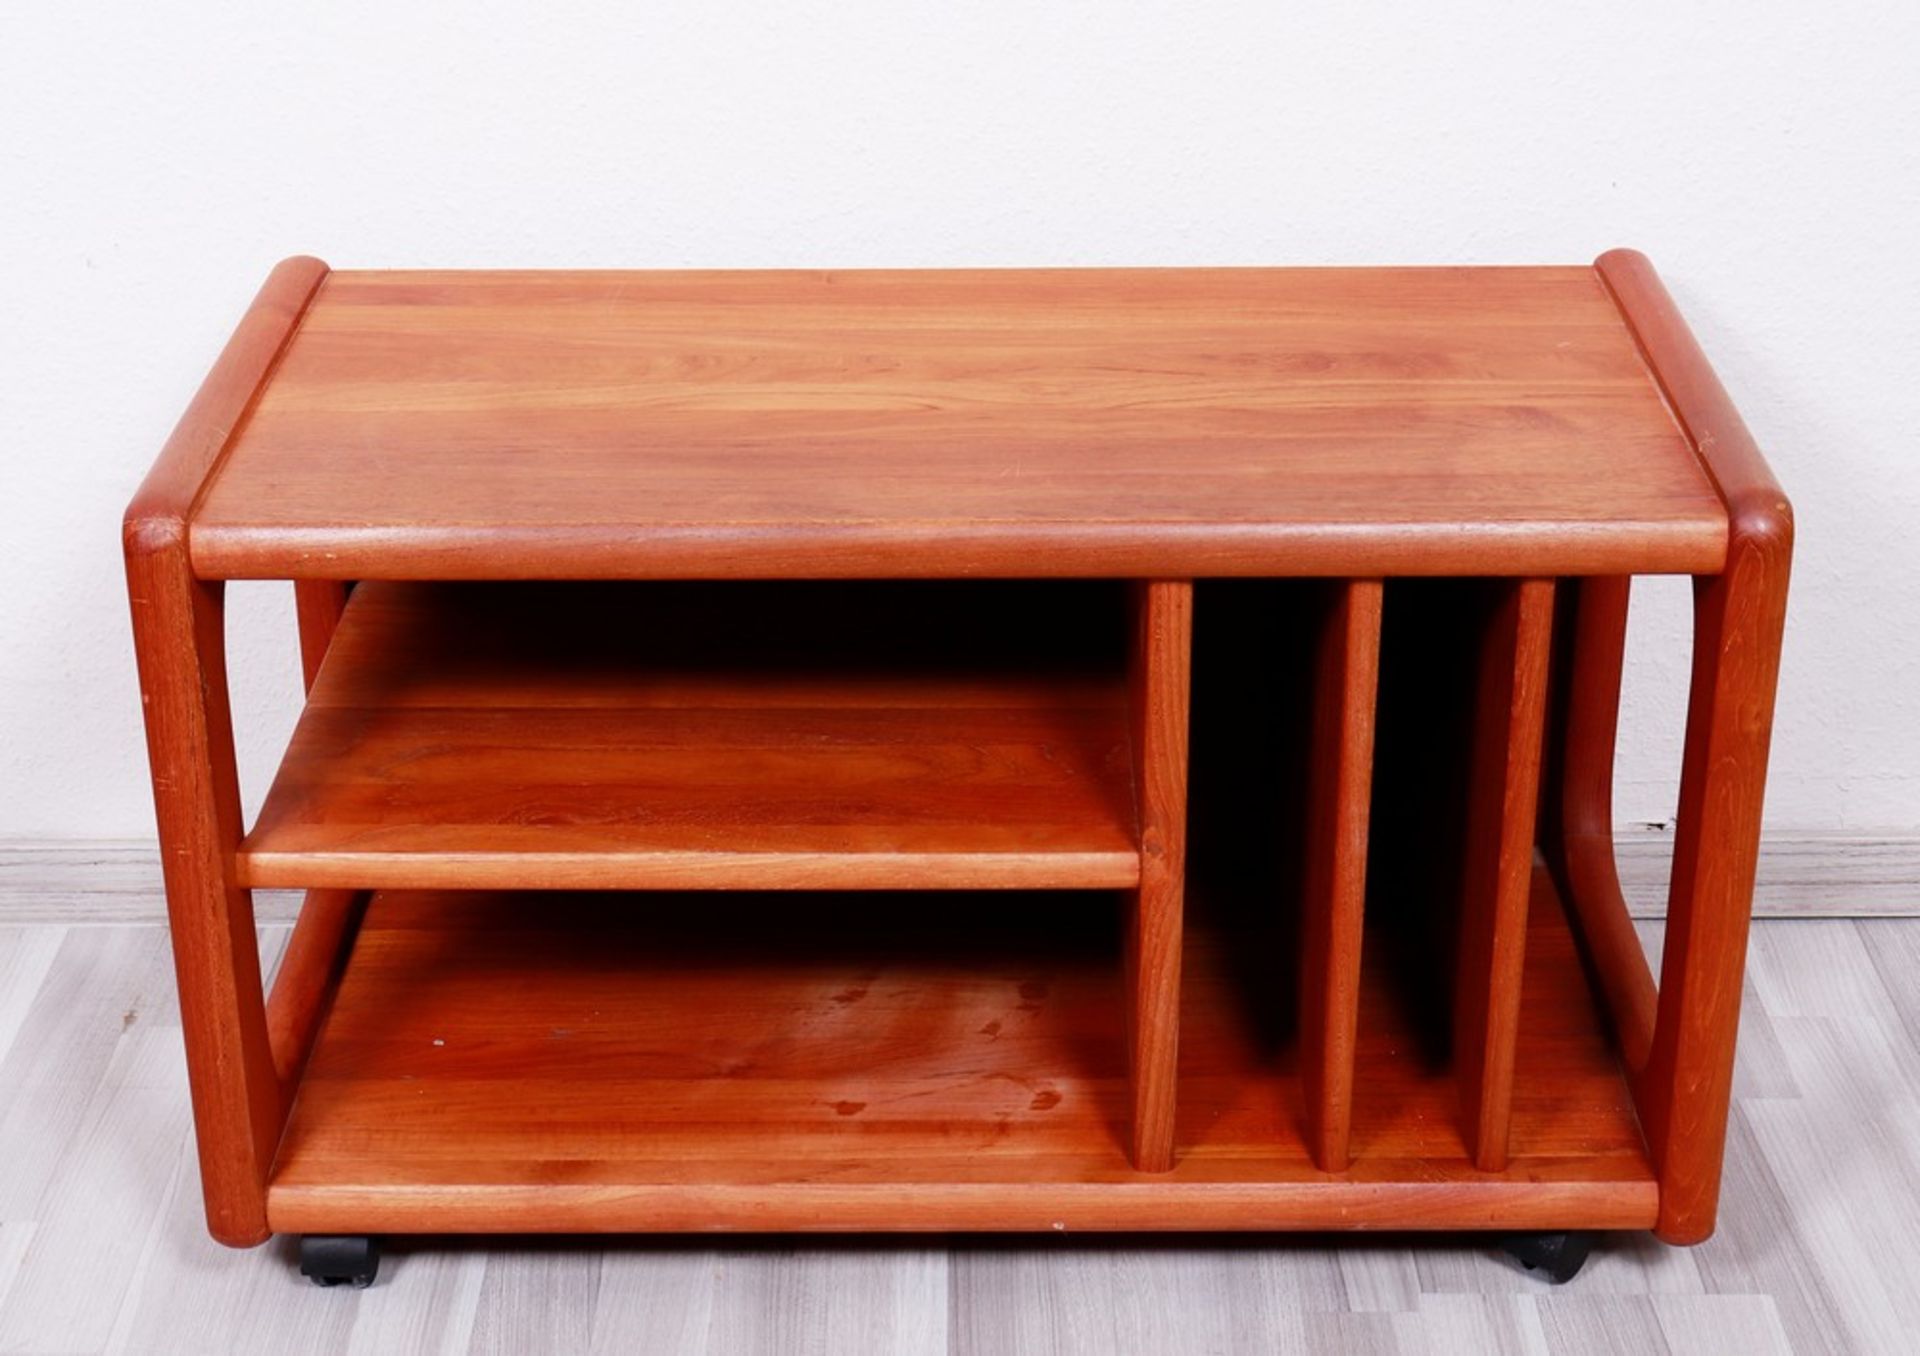 TV stand, Denmark, 2nd half 20th C. - Image 2 of 4